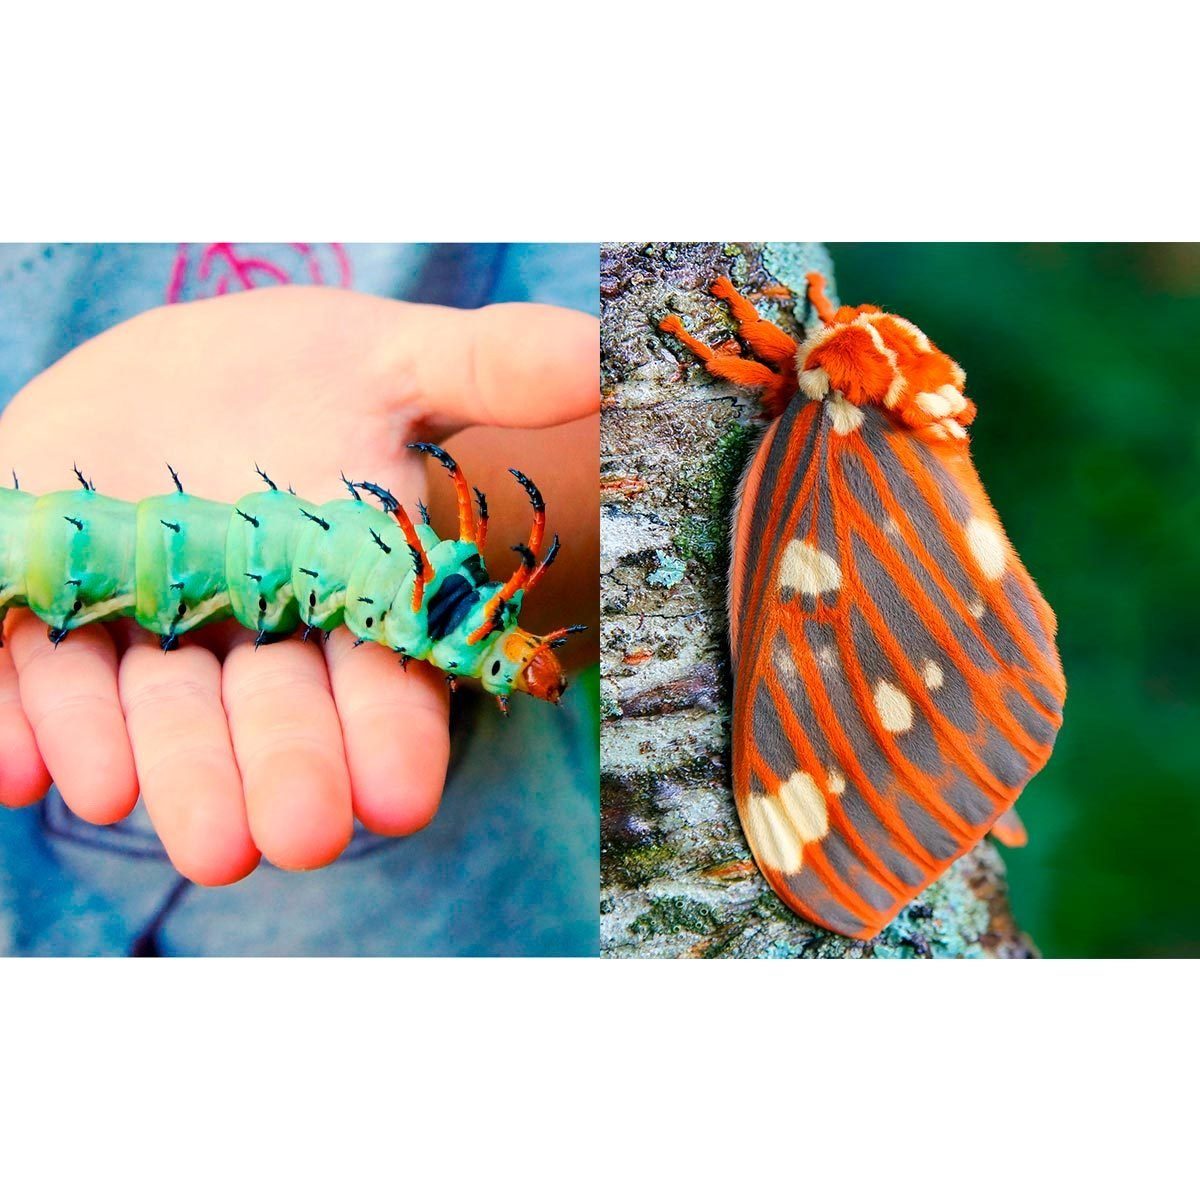 8 Crazy Cool Caterpillars You Could Find in Your Backyard